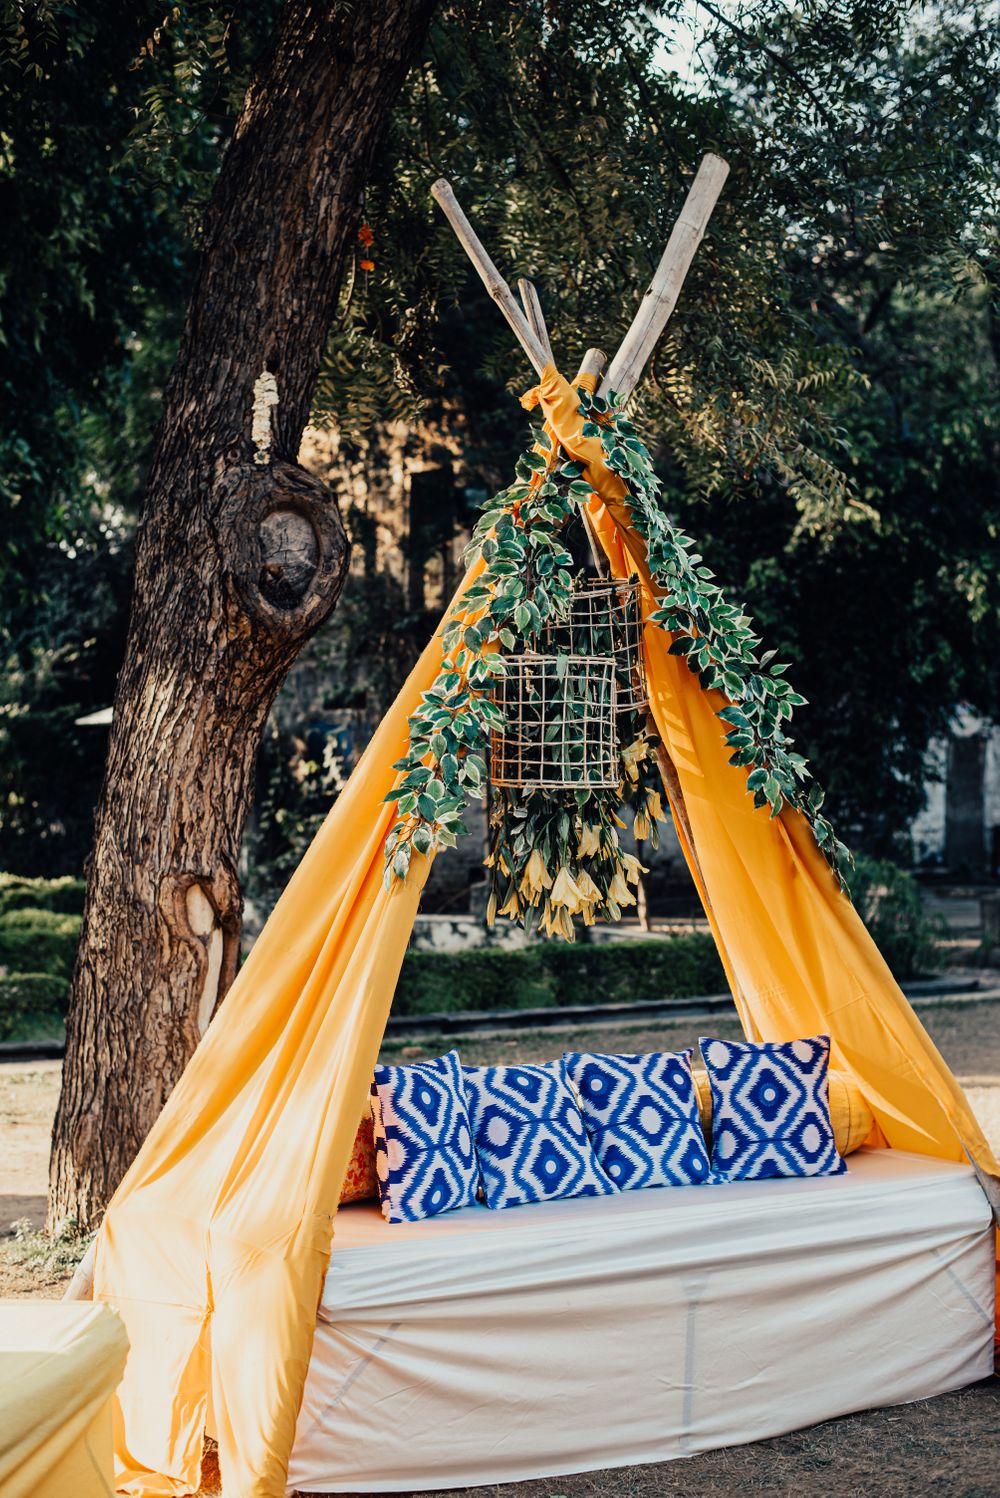 Photo of Tee pee tent decor with quirky elements.